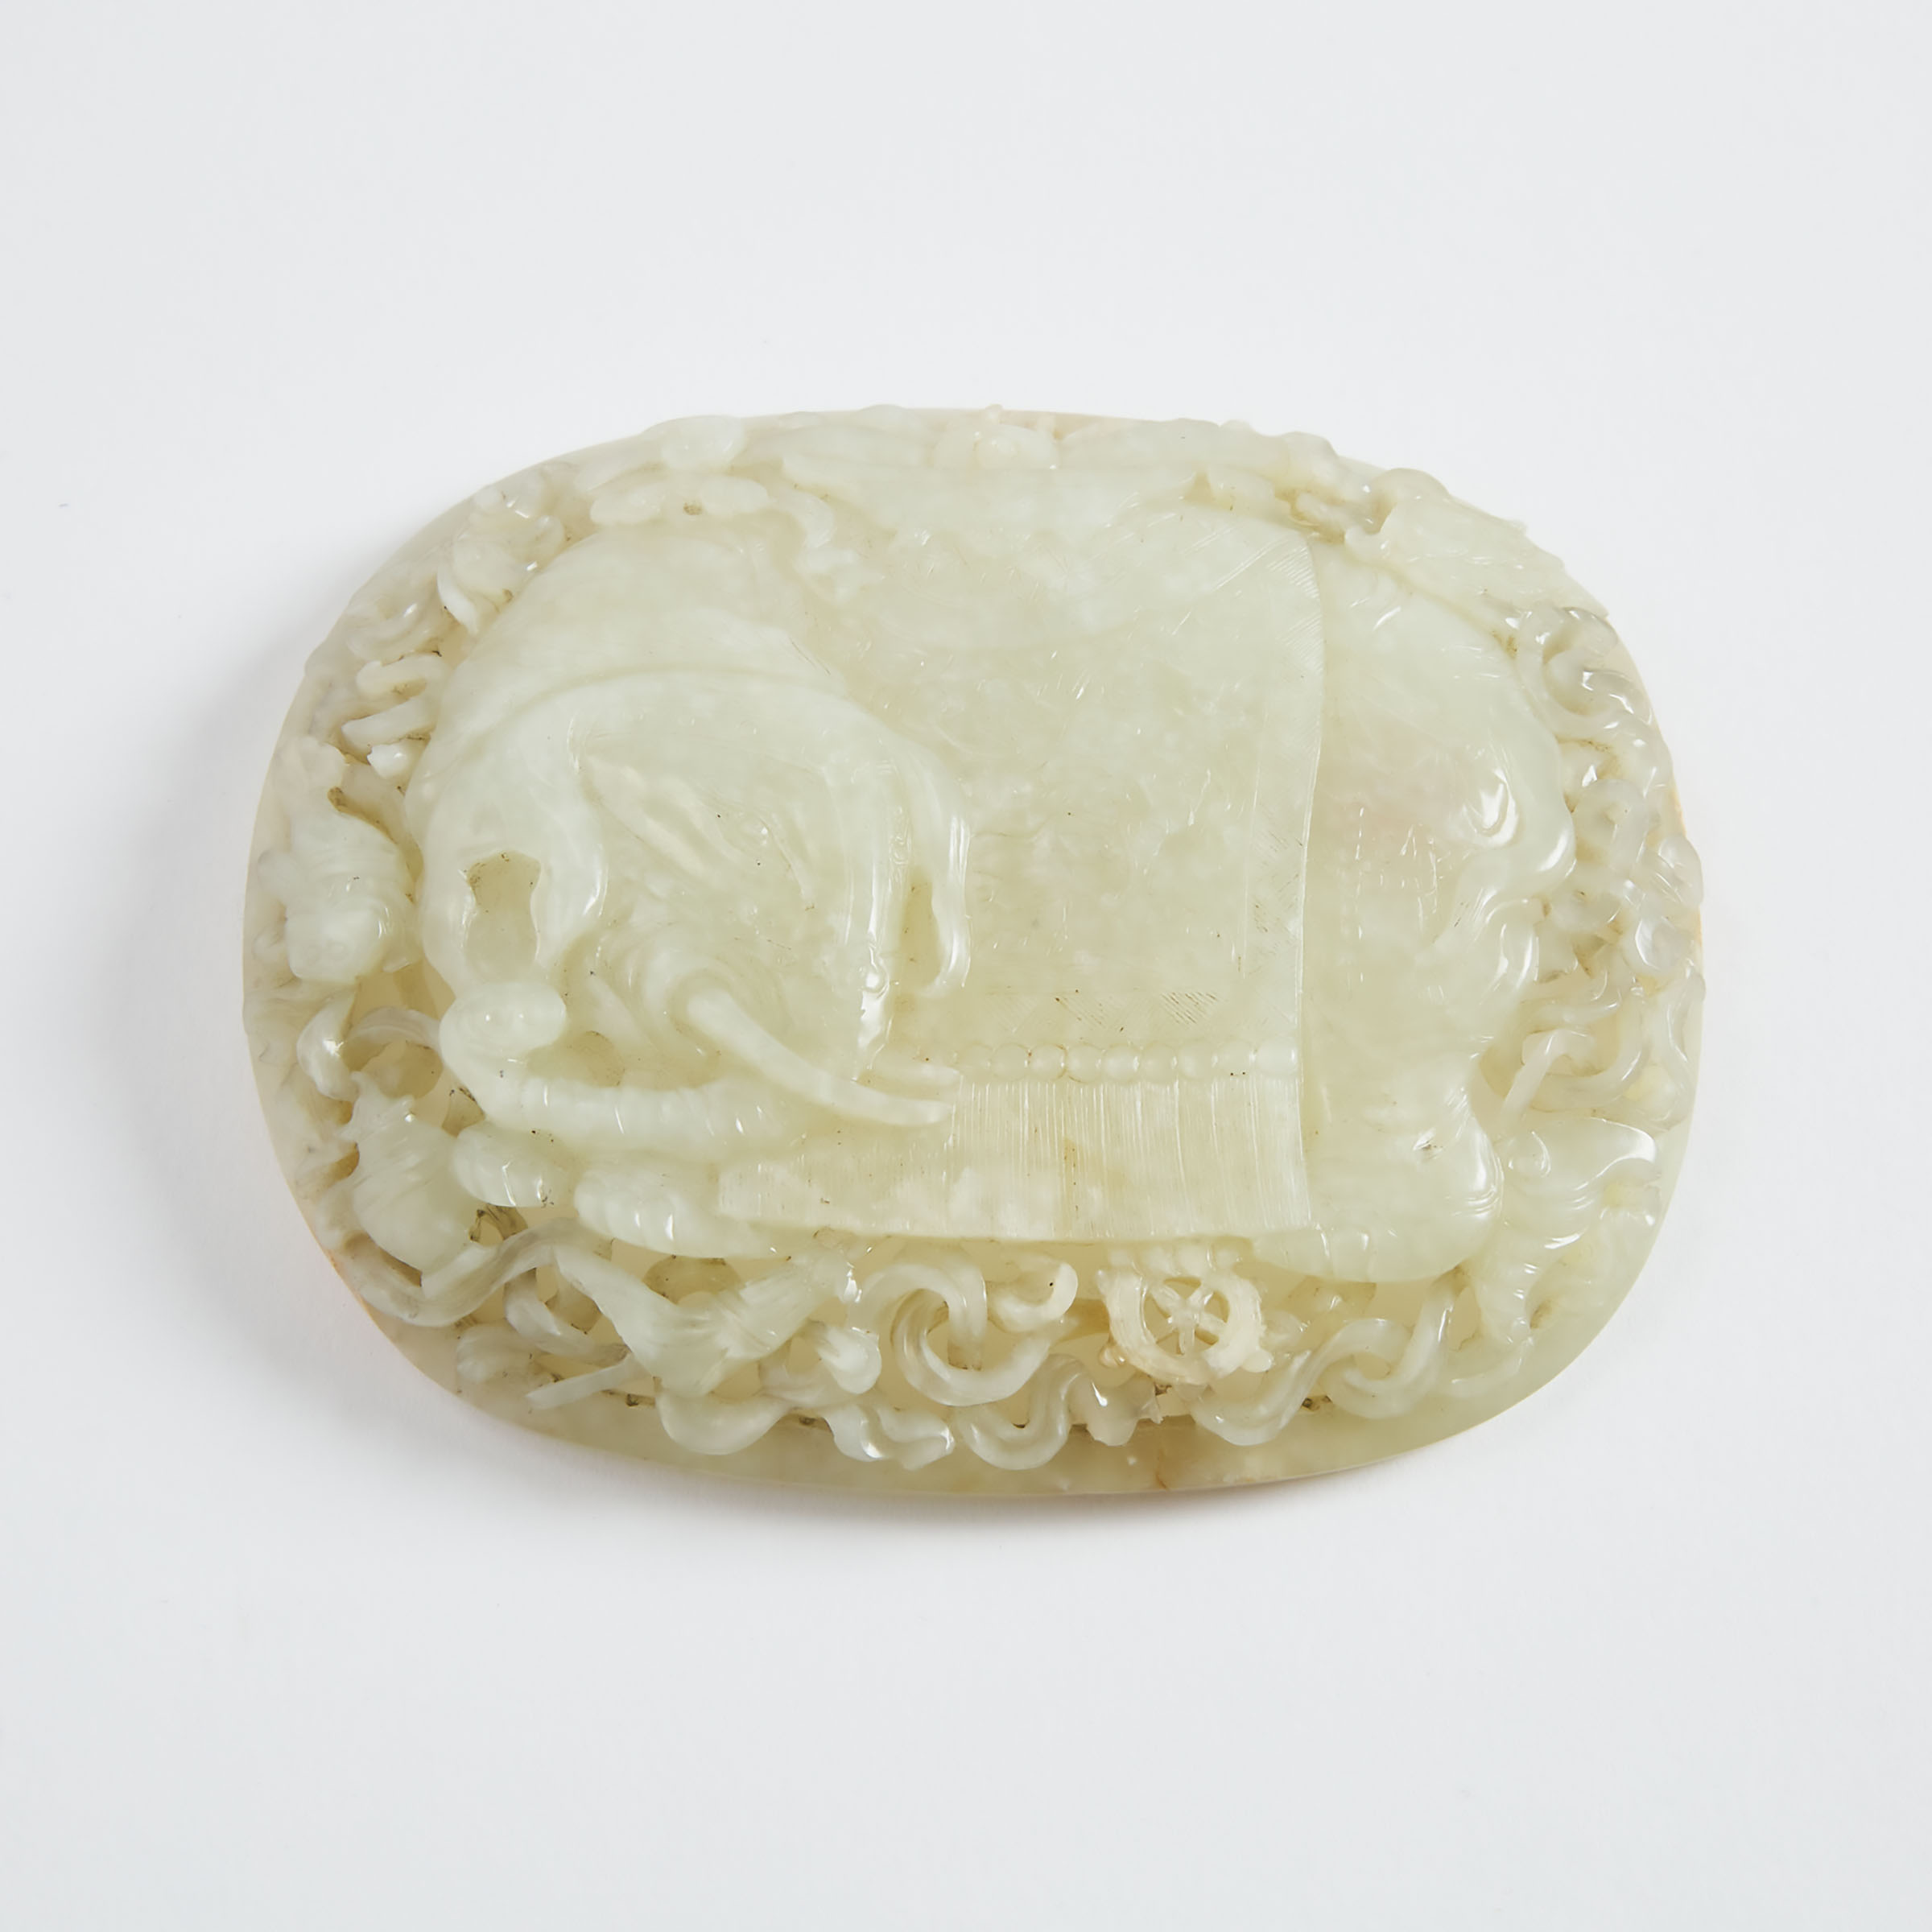 A White Jade Openwork 'Elephant' Plaque, Qing Dynasty, 18th Century